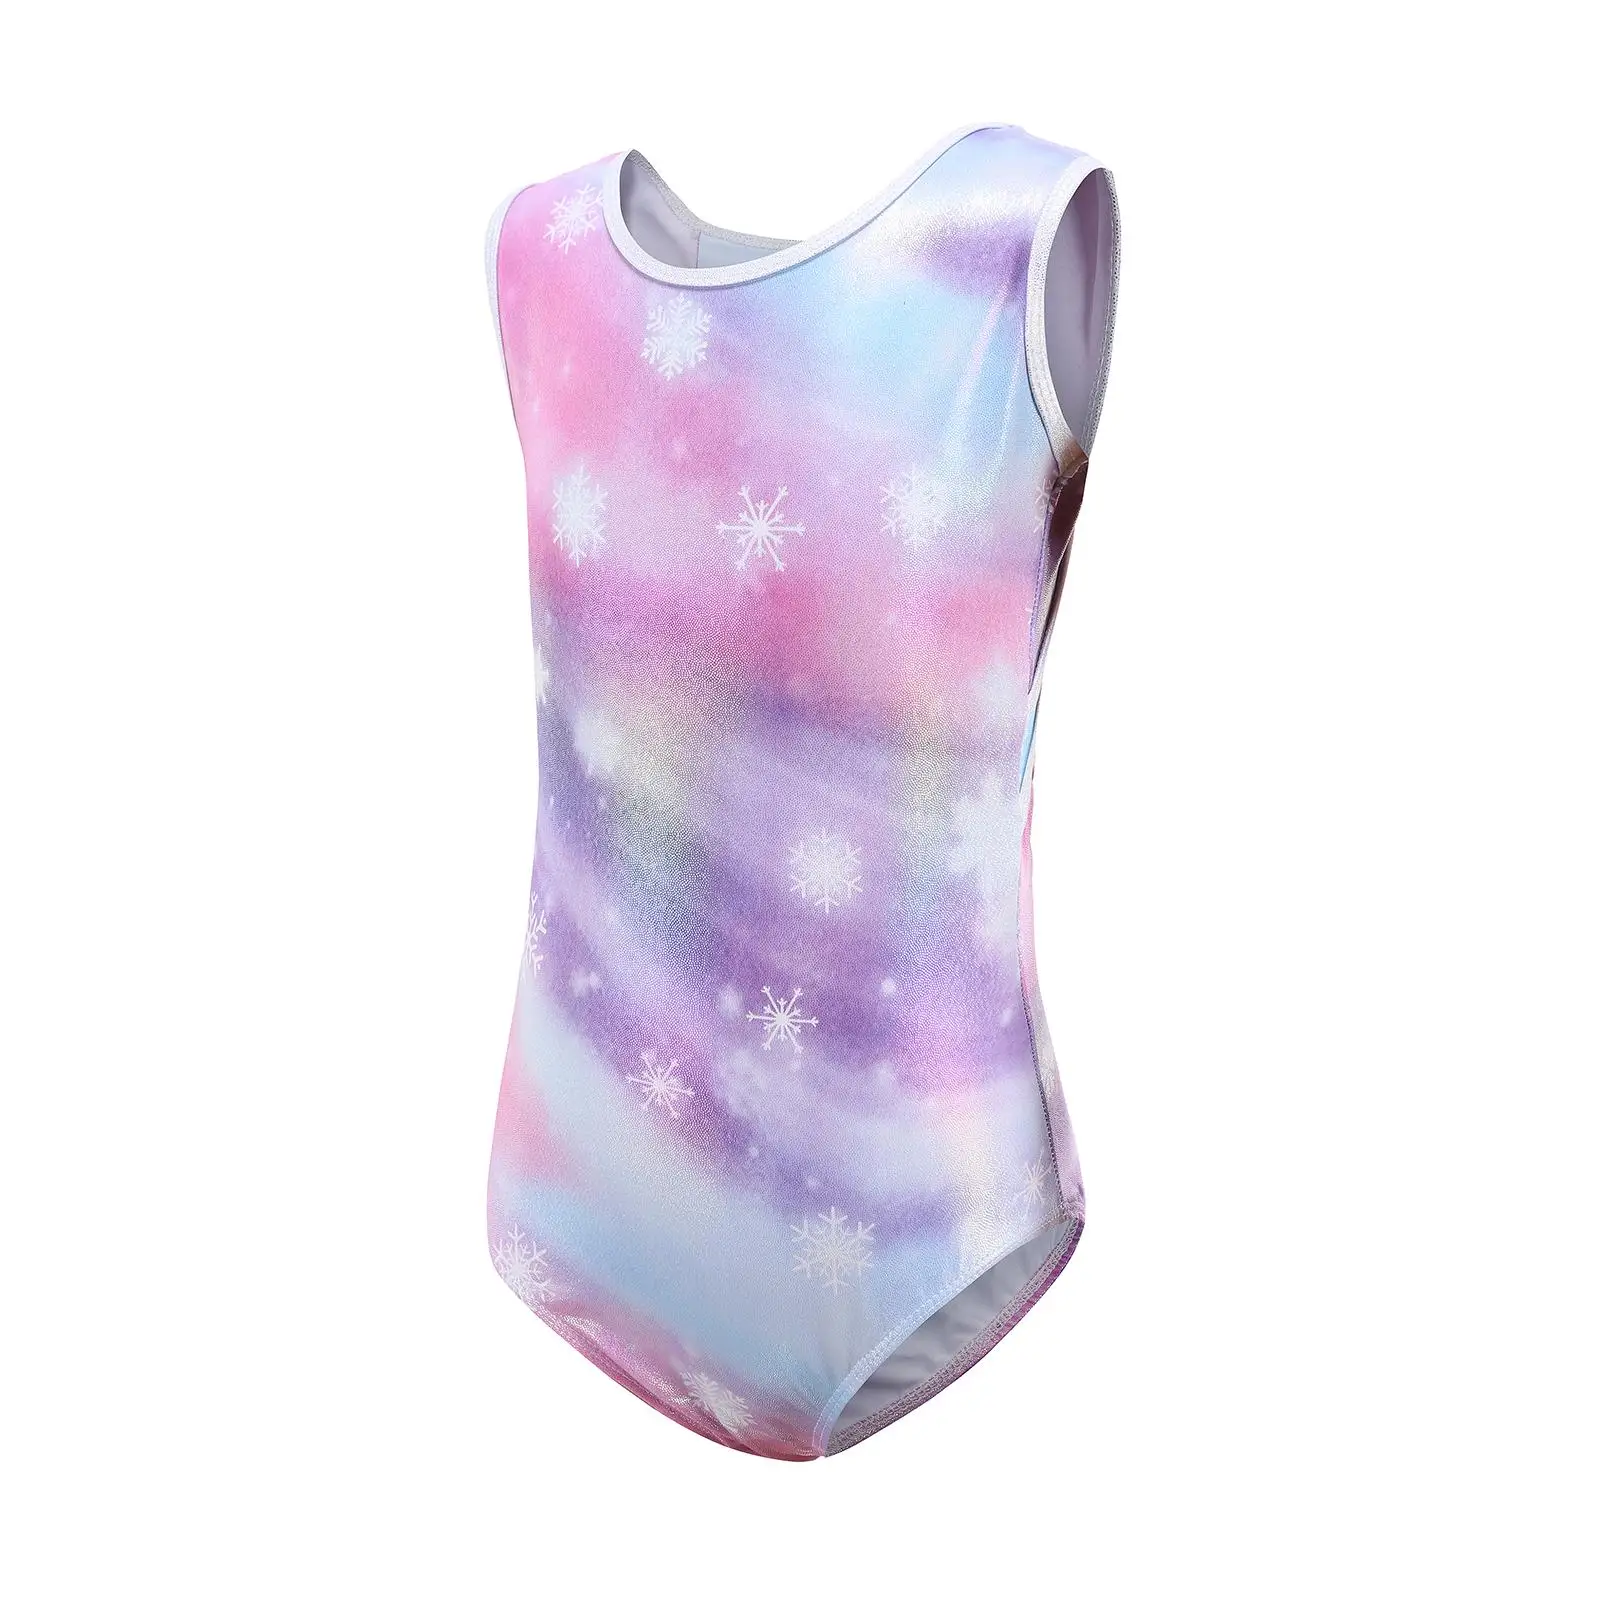 Colorful Gymnastics Leotards Practice Outfits for Children 5-14 Years Teens